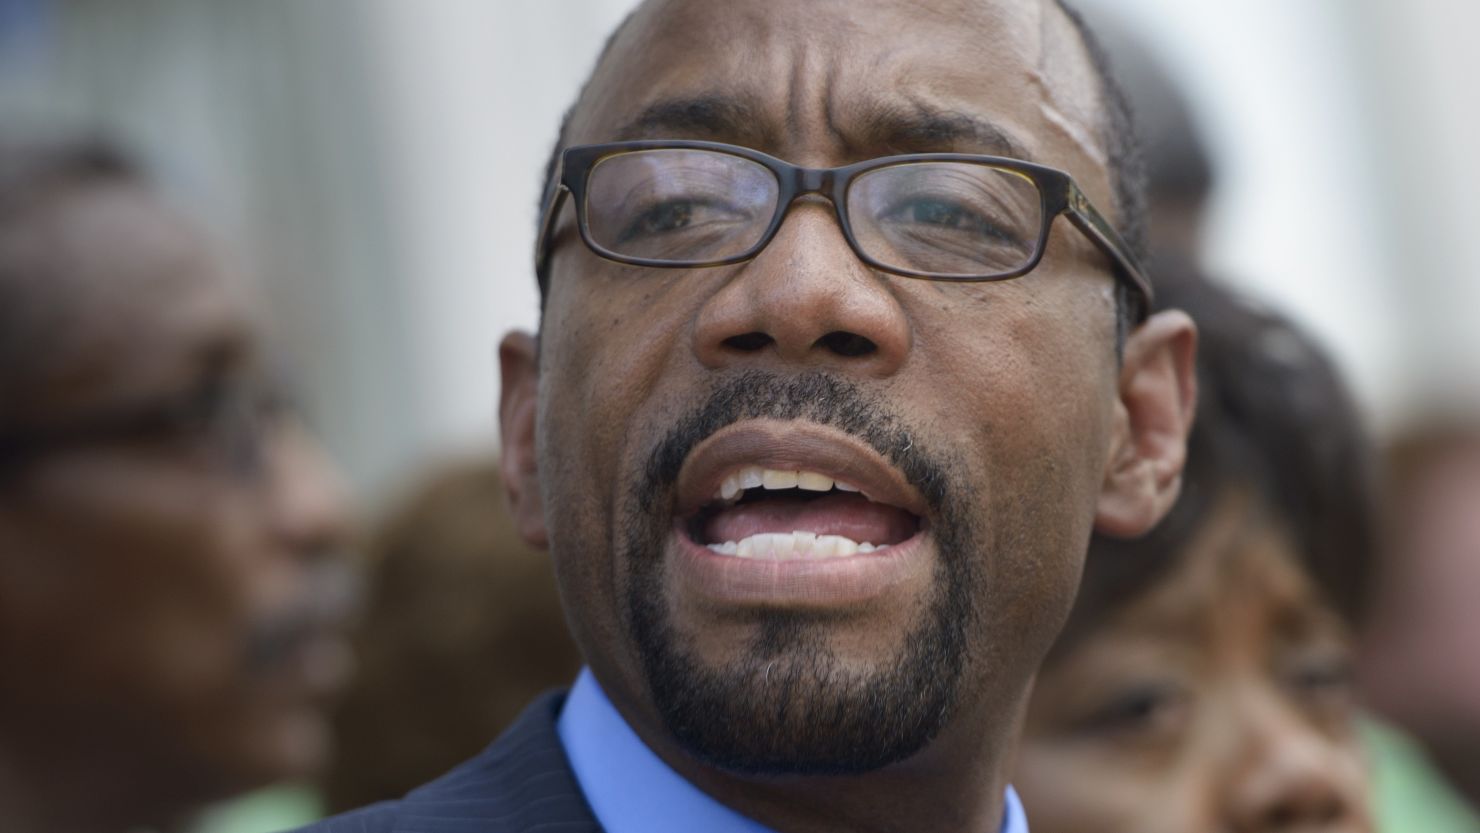 The National Association for the Advancement of Colored People (NAACP) voted on Friday May 19, 2017, to dismiss Cornell Brooks (pictured) as its president.